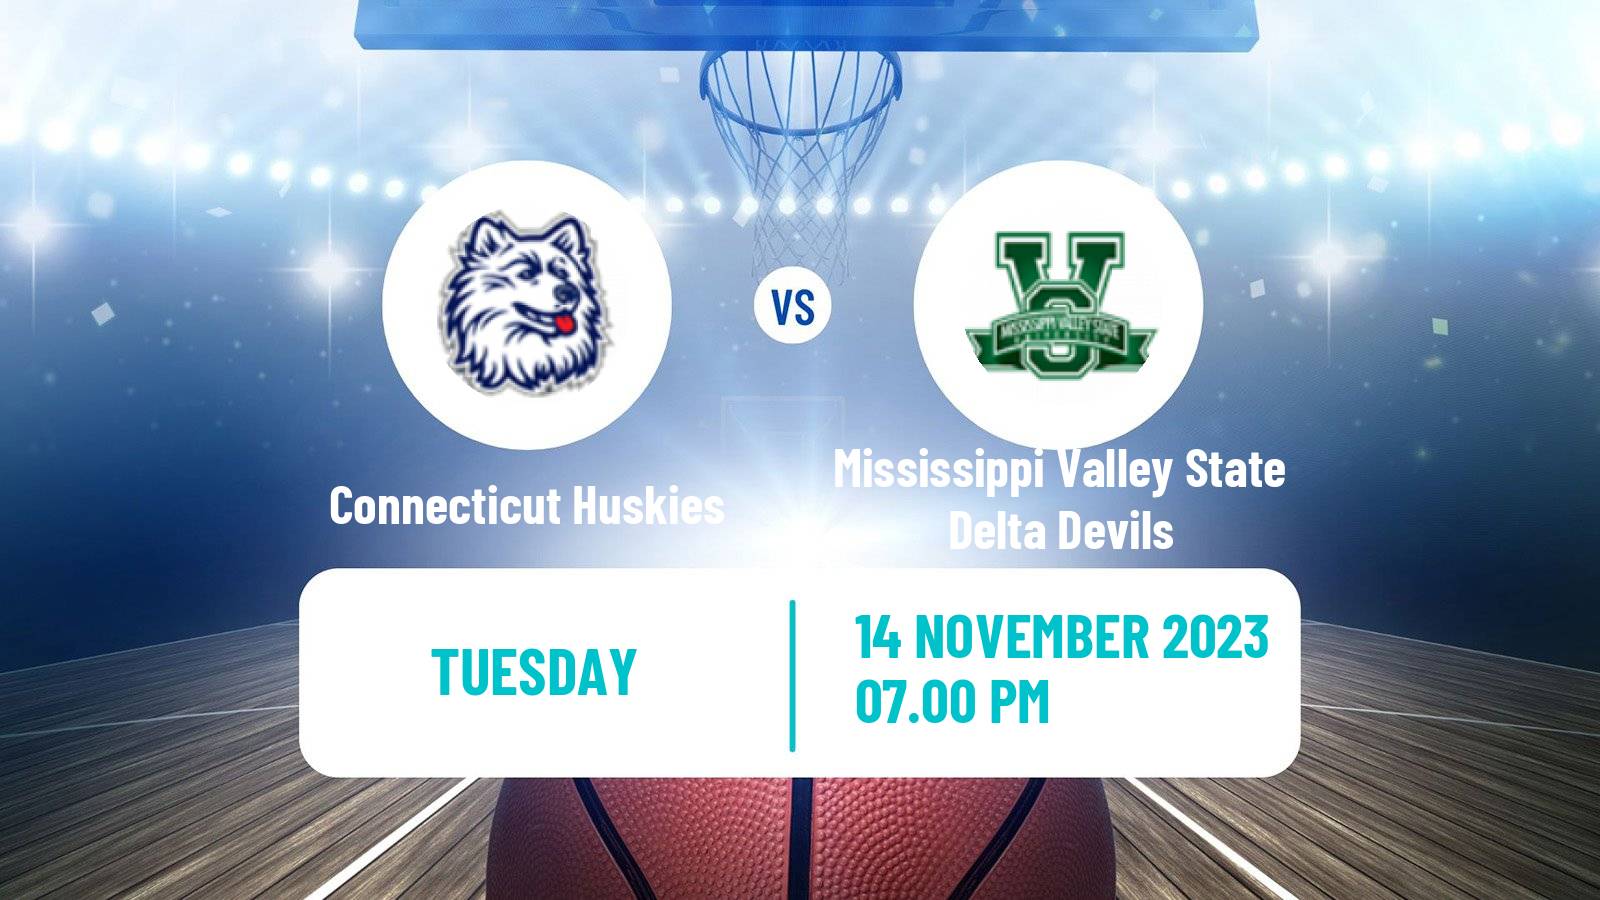 Basketball NCAA College Basketball Connecticut Huskies - Mississippi Valley State Delta Devils